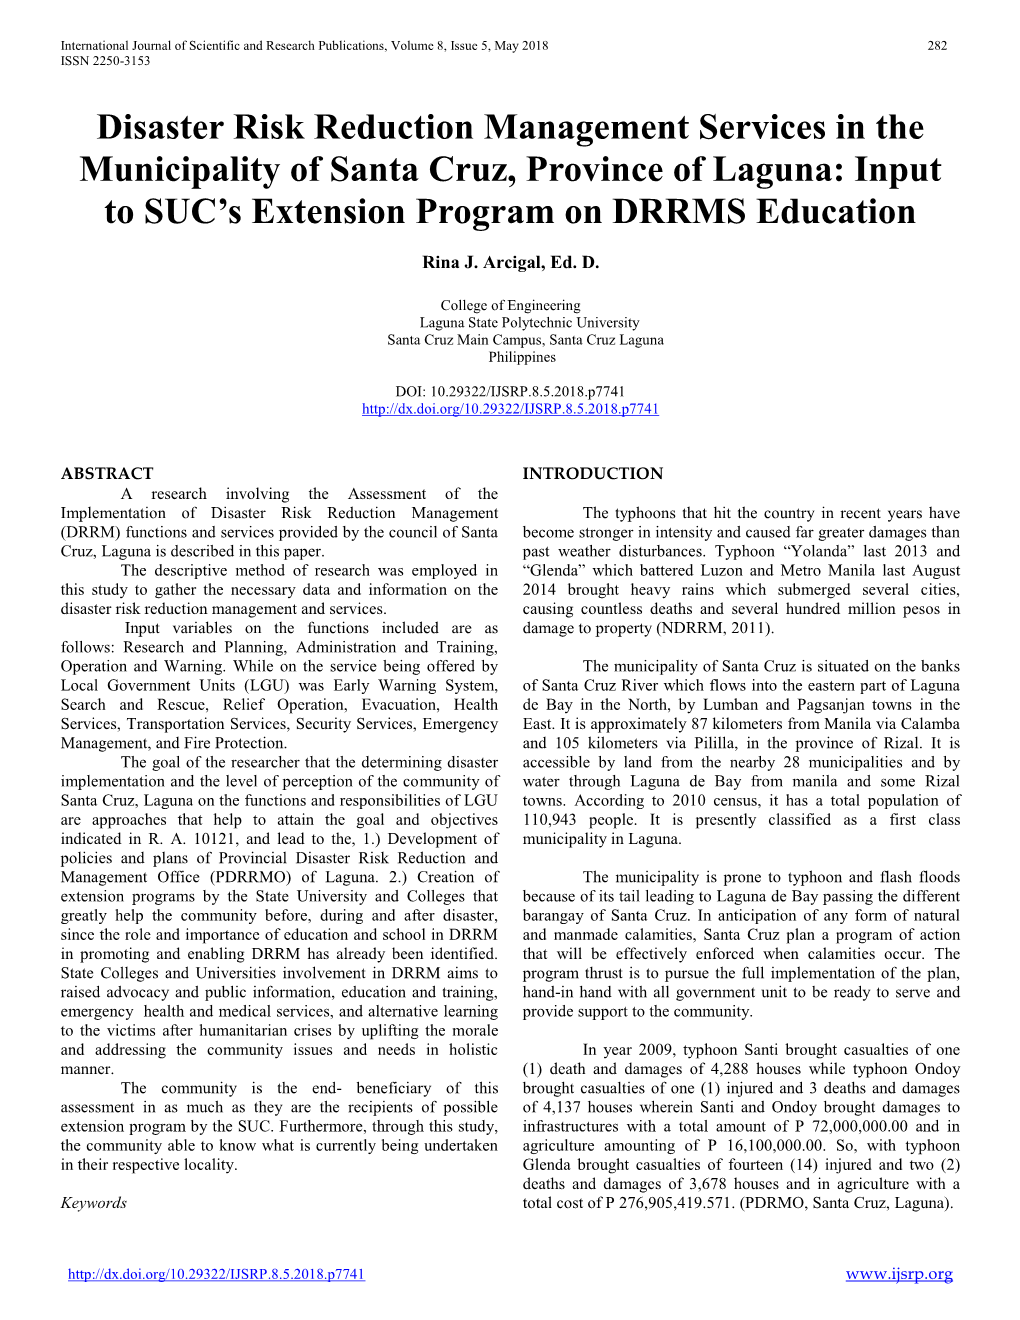 Disaster Risk Reduction Management Services in the Municipality of Santa Cruz, Province of Laguna: Input to SUC’S Extension Program on DRRMS Education